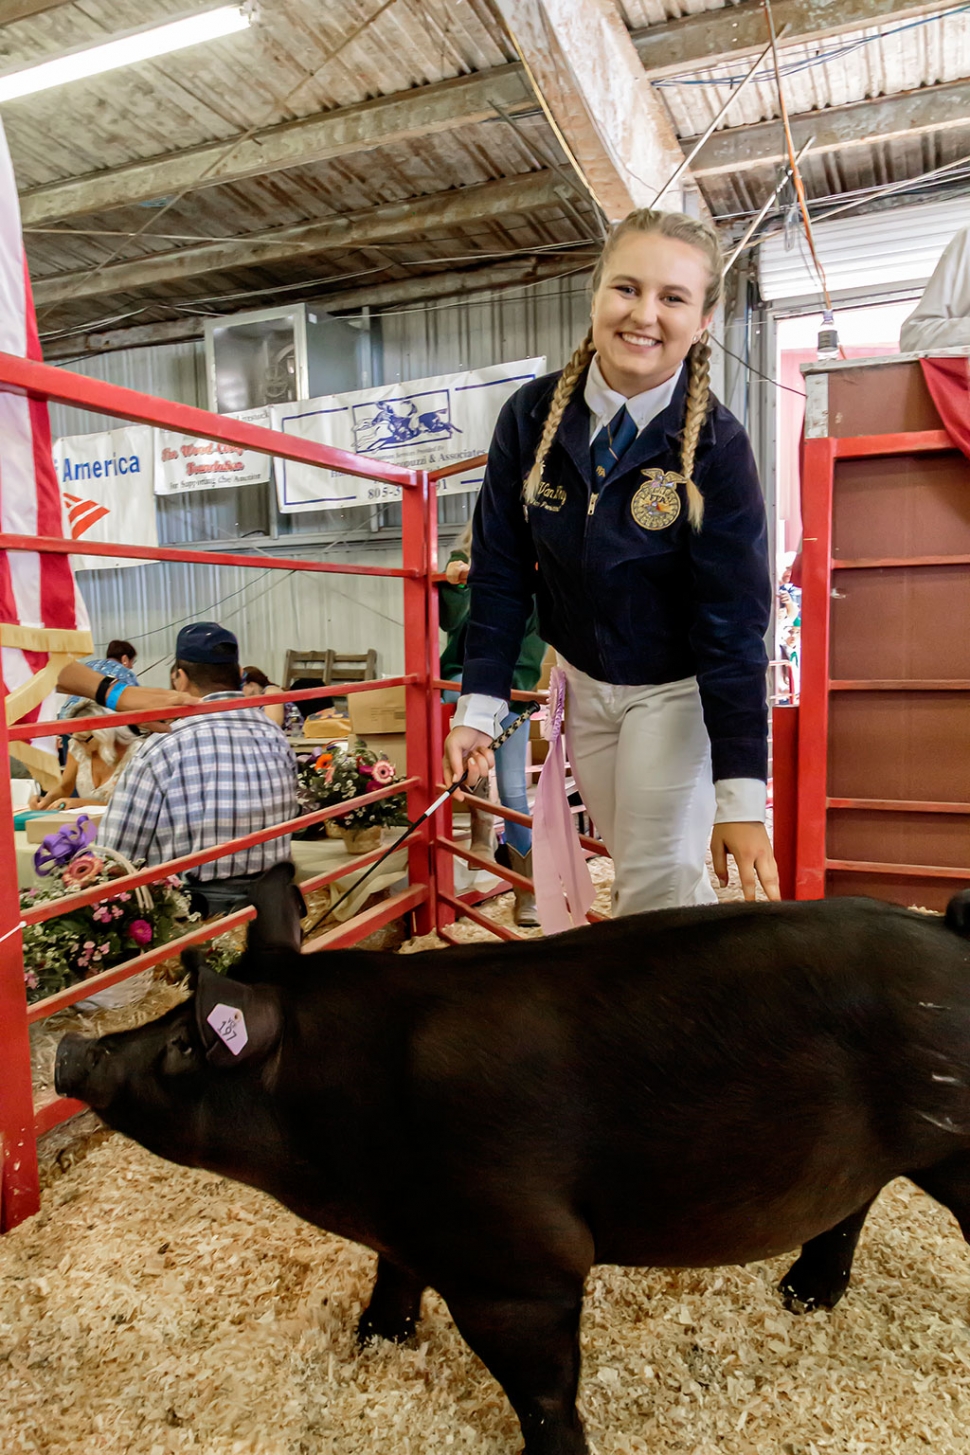 Pictured is Alexis Van Why who raised a 242 pound pig, named Bubba, and was awarded Reserve FFA Champion. Bubba was bought for $60 a pound at the auction. Total: $14,520.